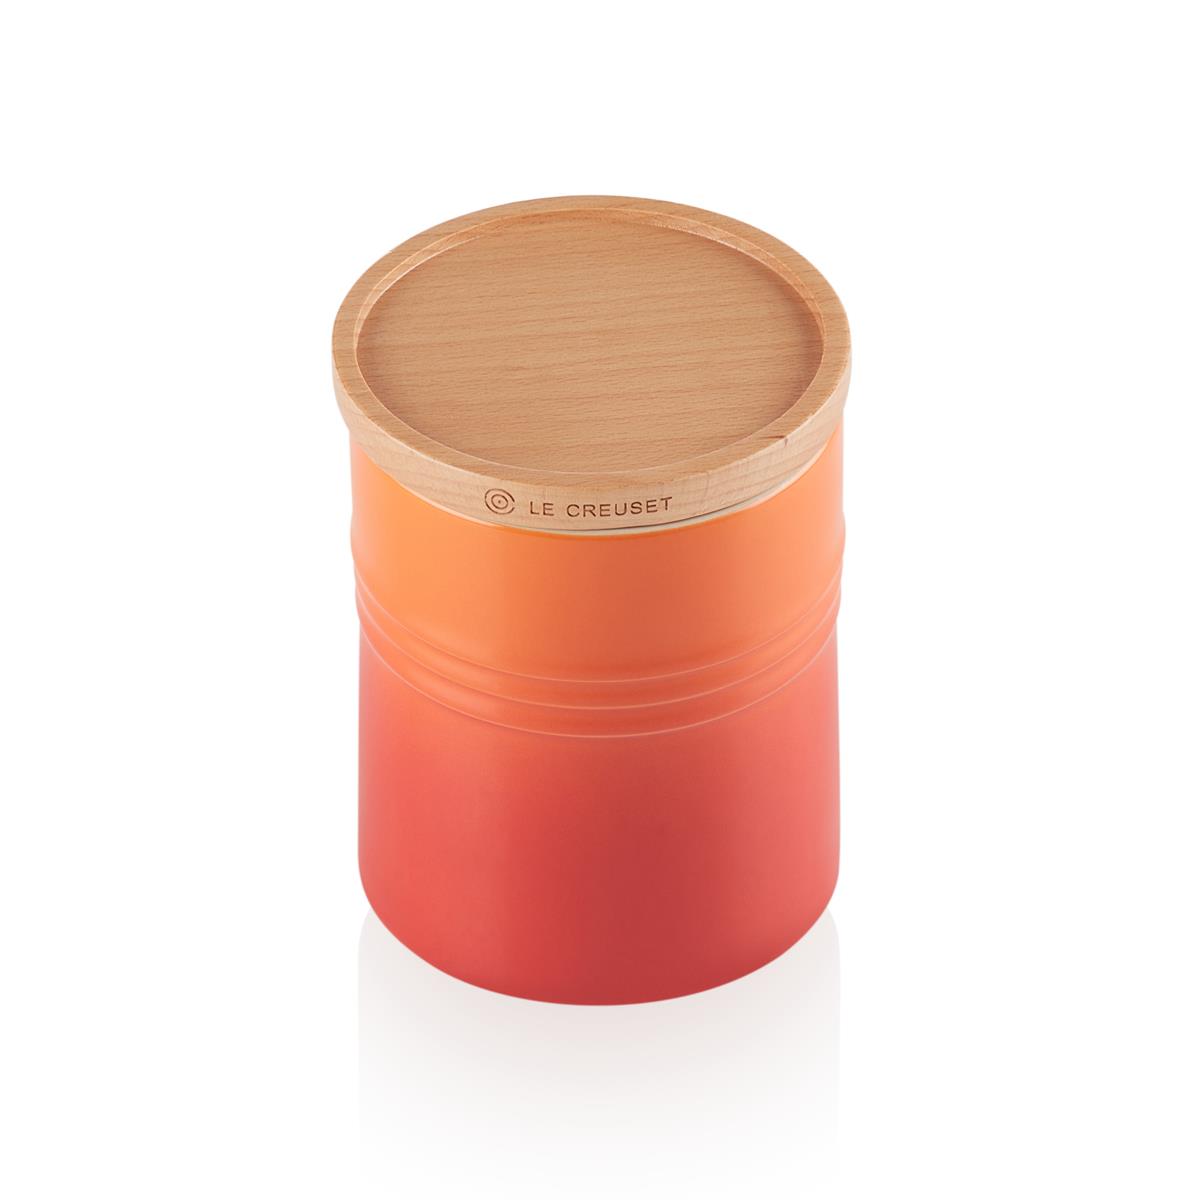 What colors & sizes does the le creuset storage jar offer?